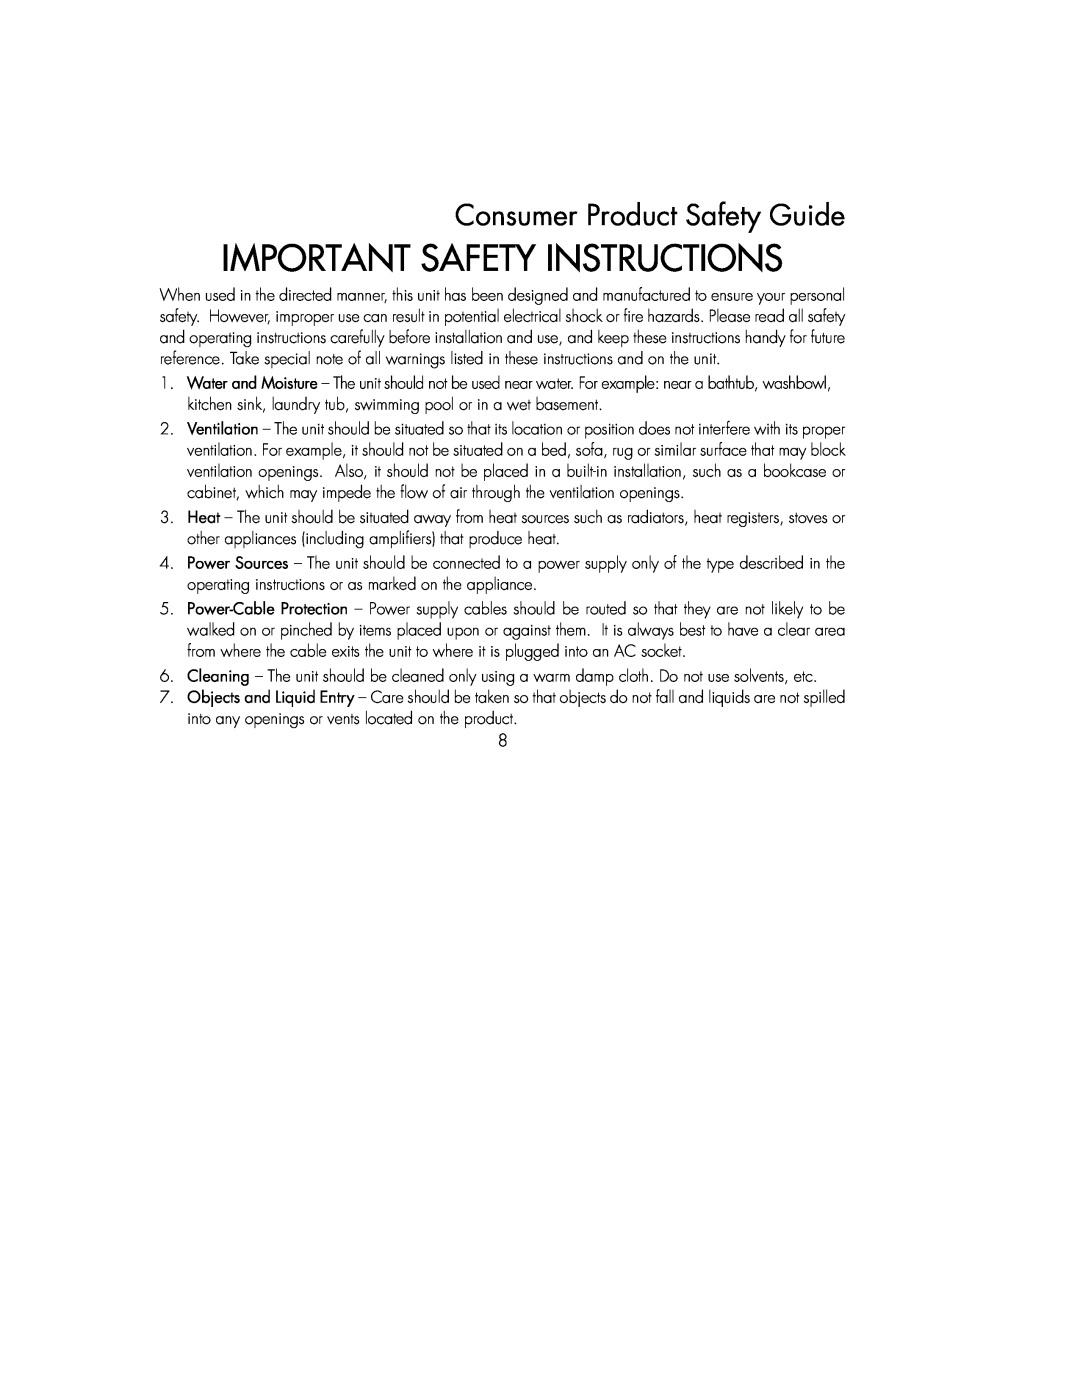 iHome IBT24GC, IBT24UC instruction manual Consumer Product Safety Guide, Important Safety Instructions 